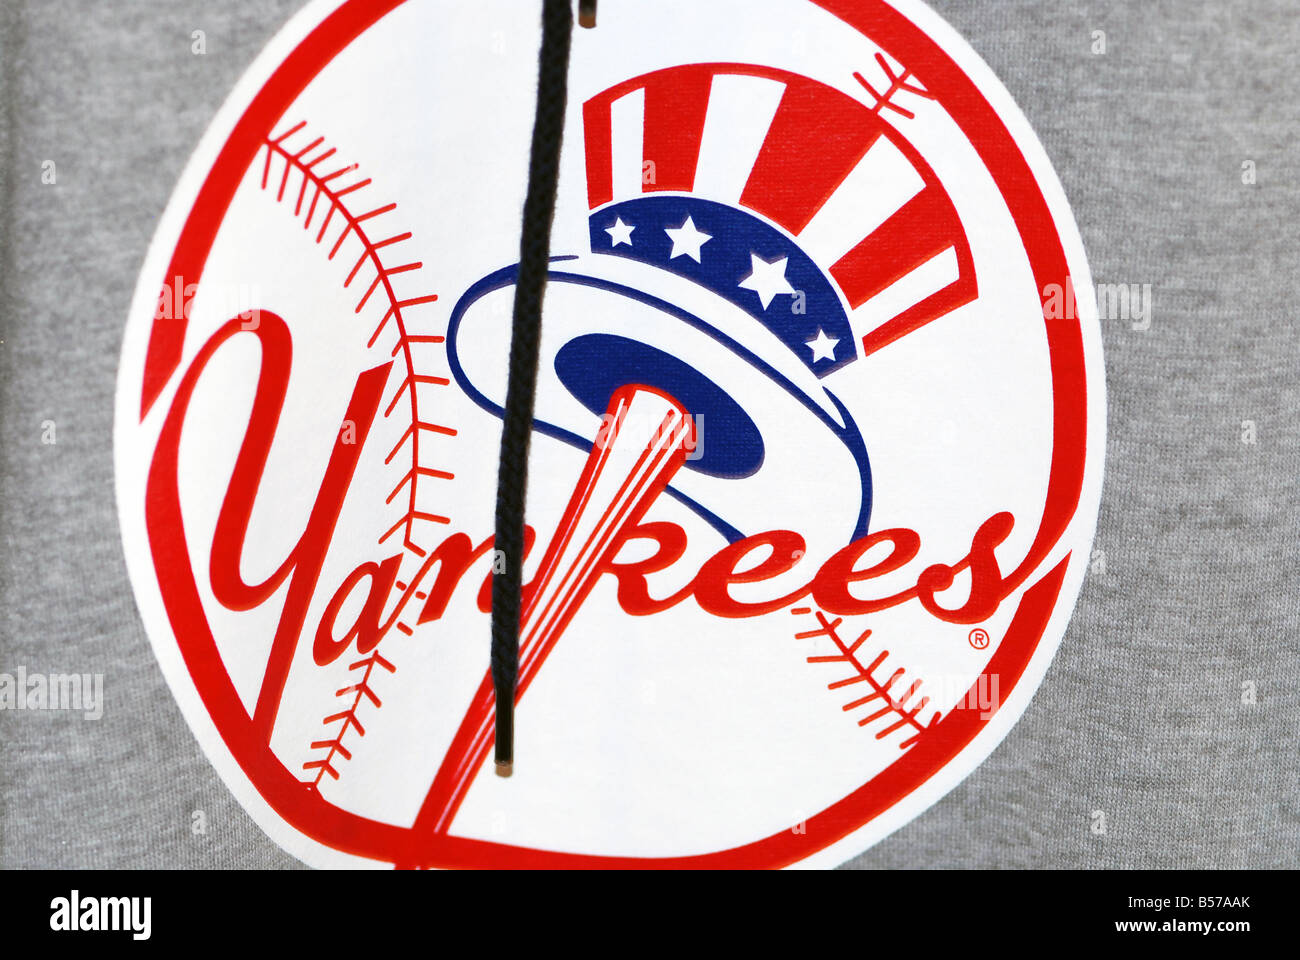 NY Yankees Banque D'Images